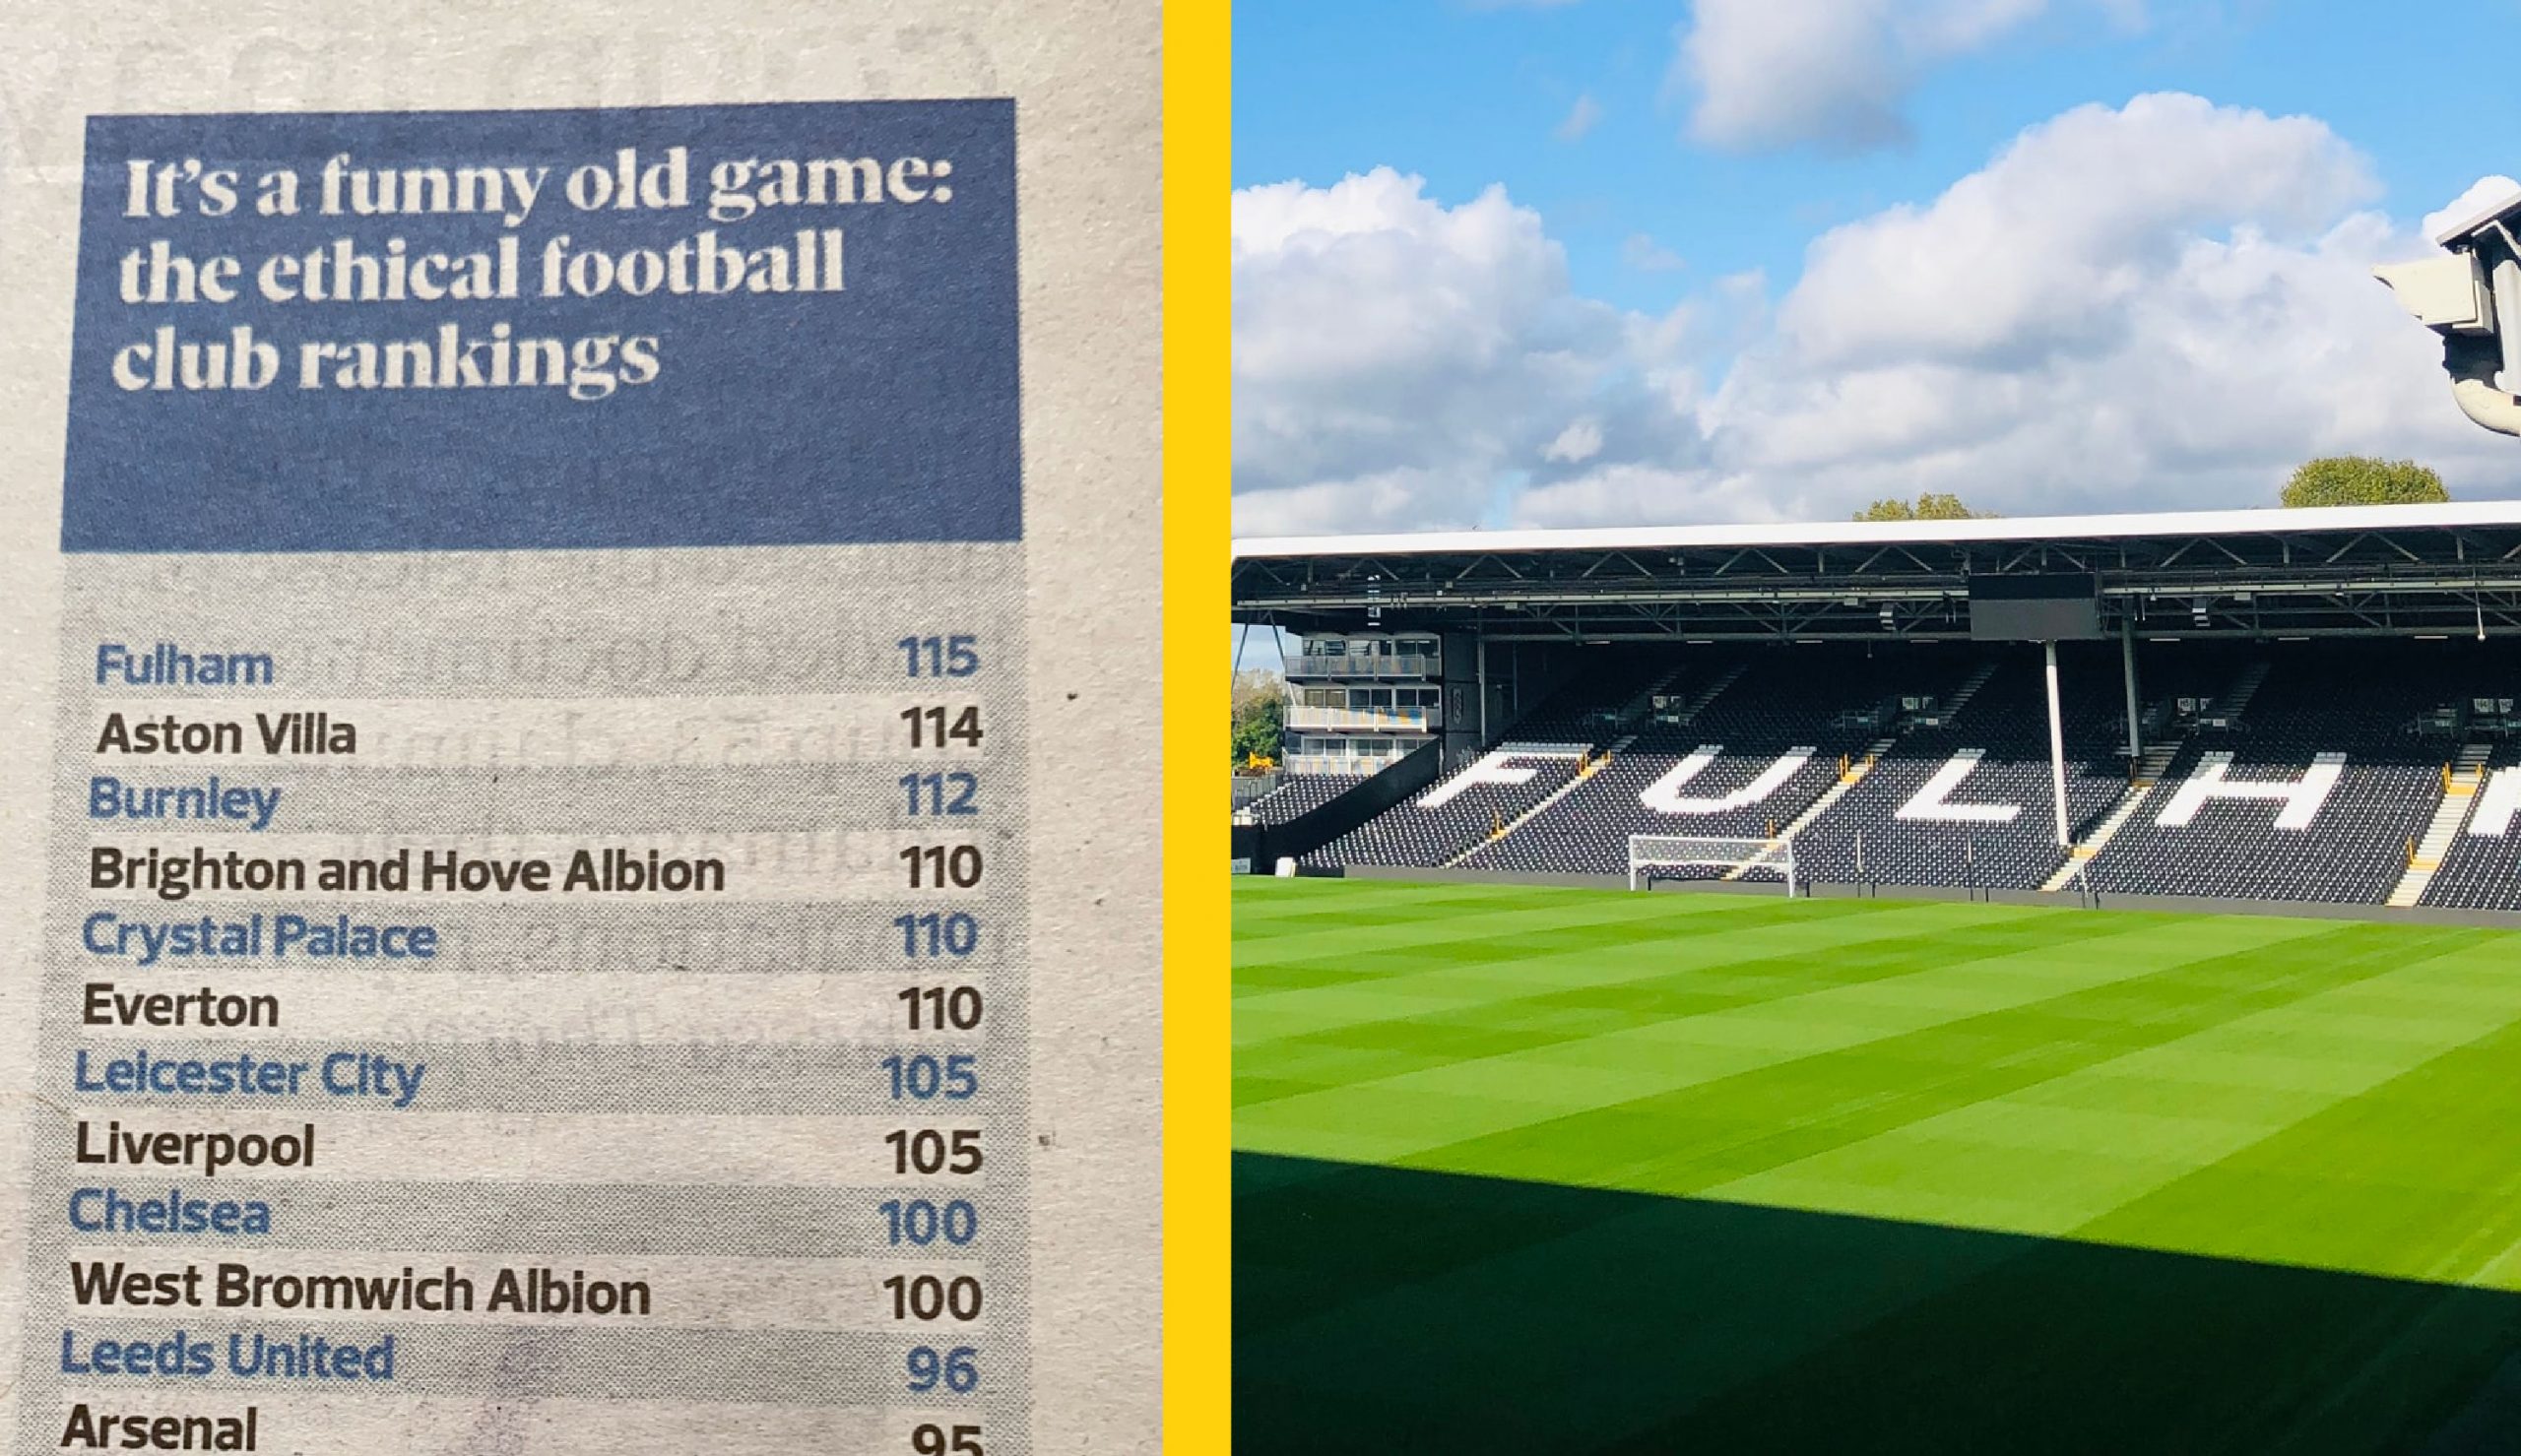 Fulham are most ethically run club in the Premier League